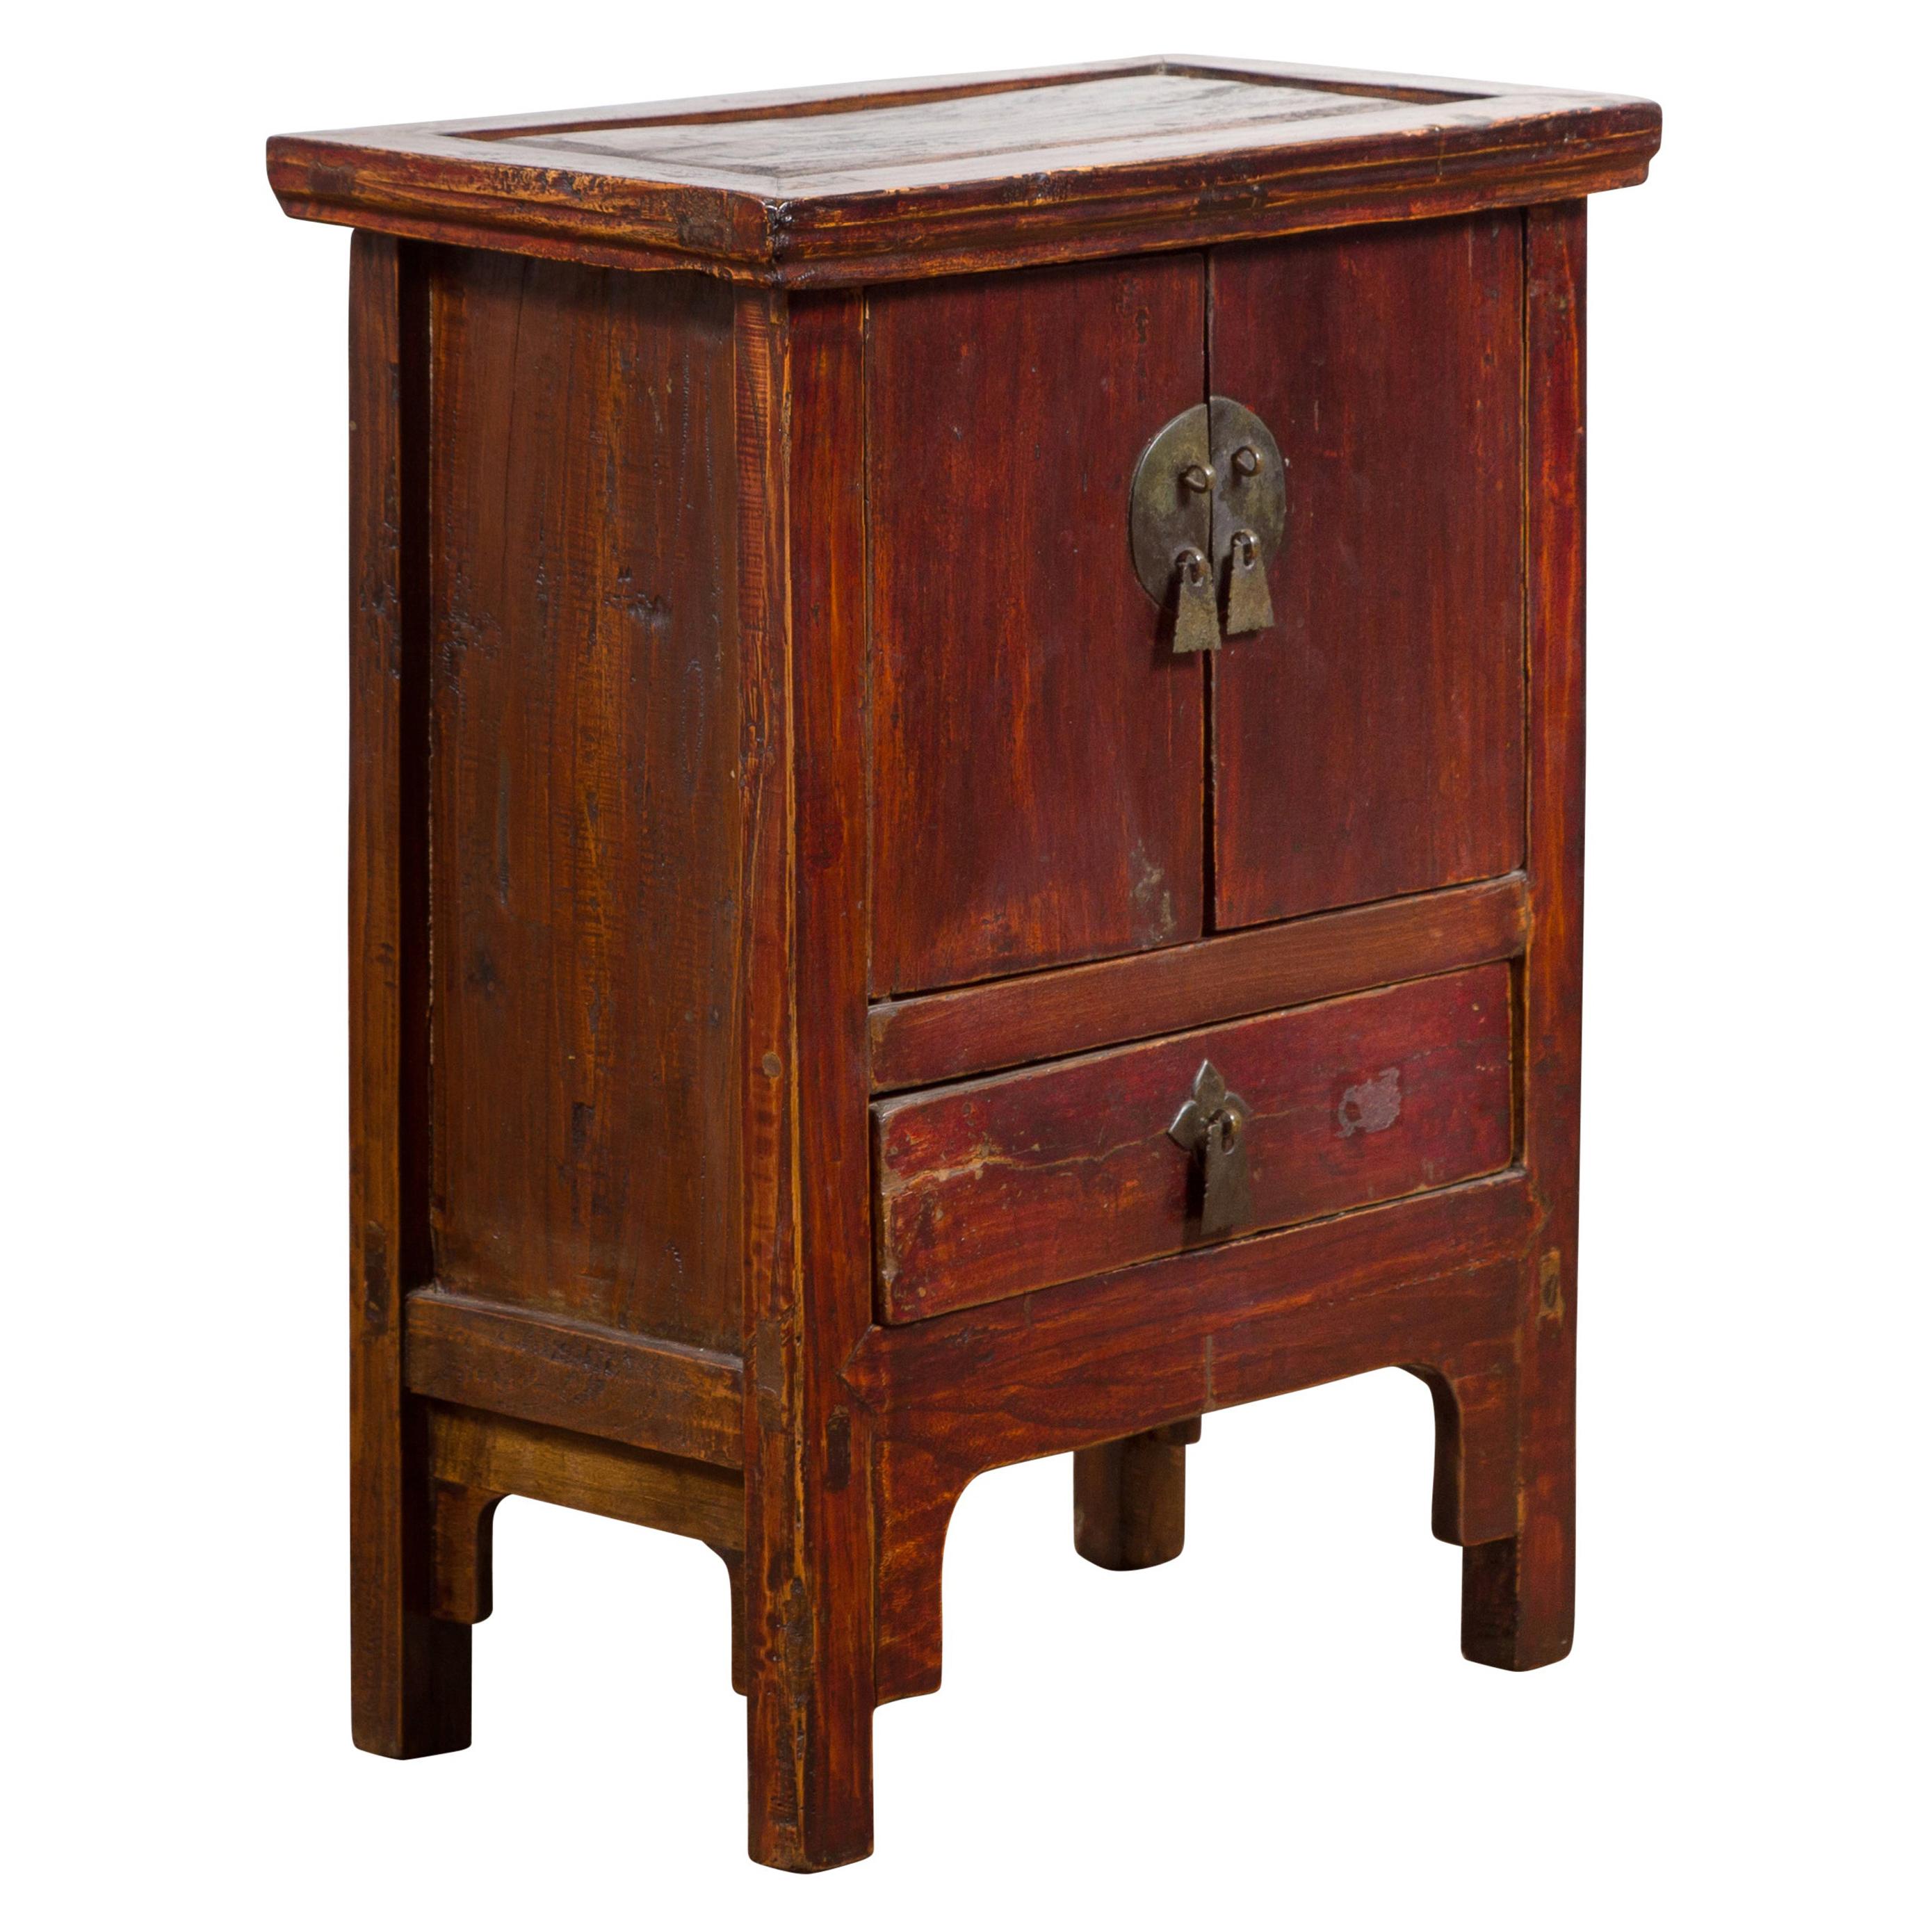 Chinese Qing Dynasty 19th Century Bedside Table with Double Doors and Low Drawer